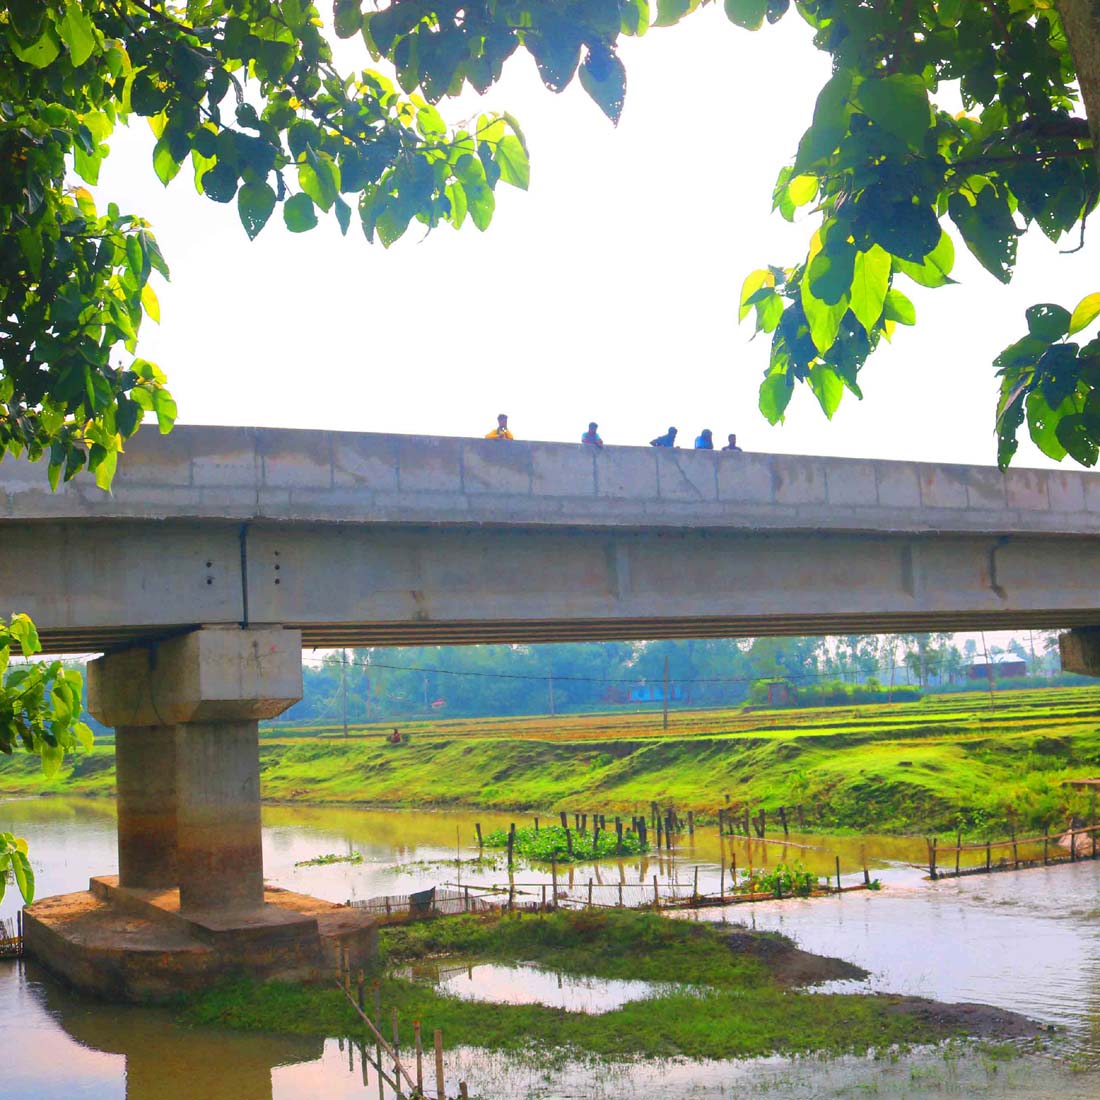 Ghar Tree village people & roads stock photos in Bangladesh Breathtaking preview image.